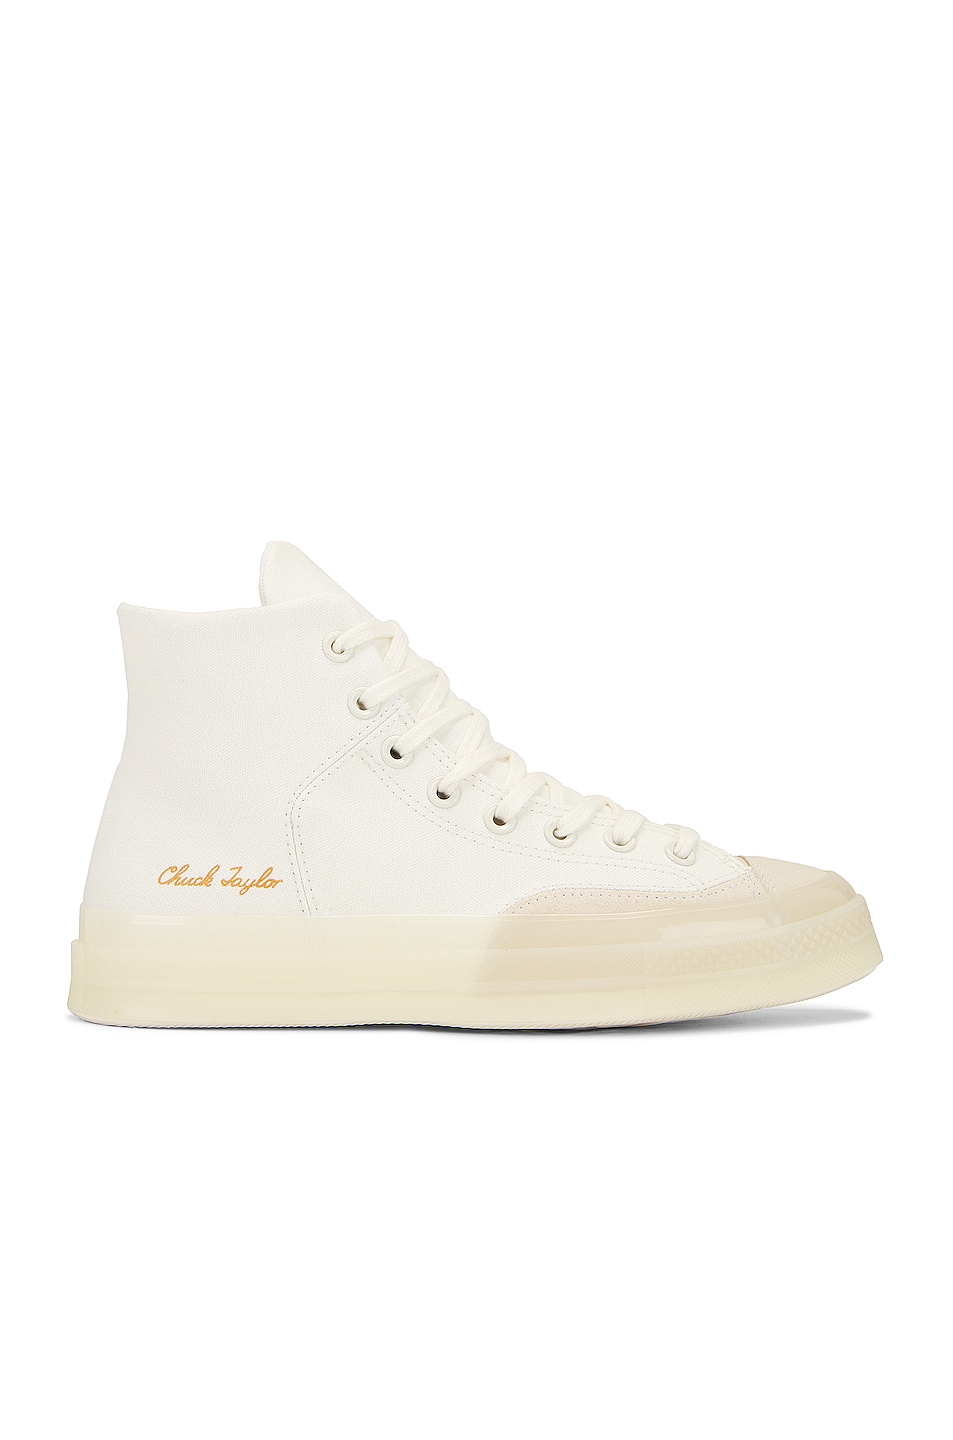 Image 1 of Converse Chuck 70 Marquis Hi in Vintage White, Natural Ivory & Egret